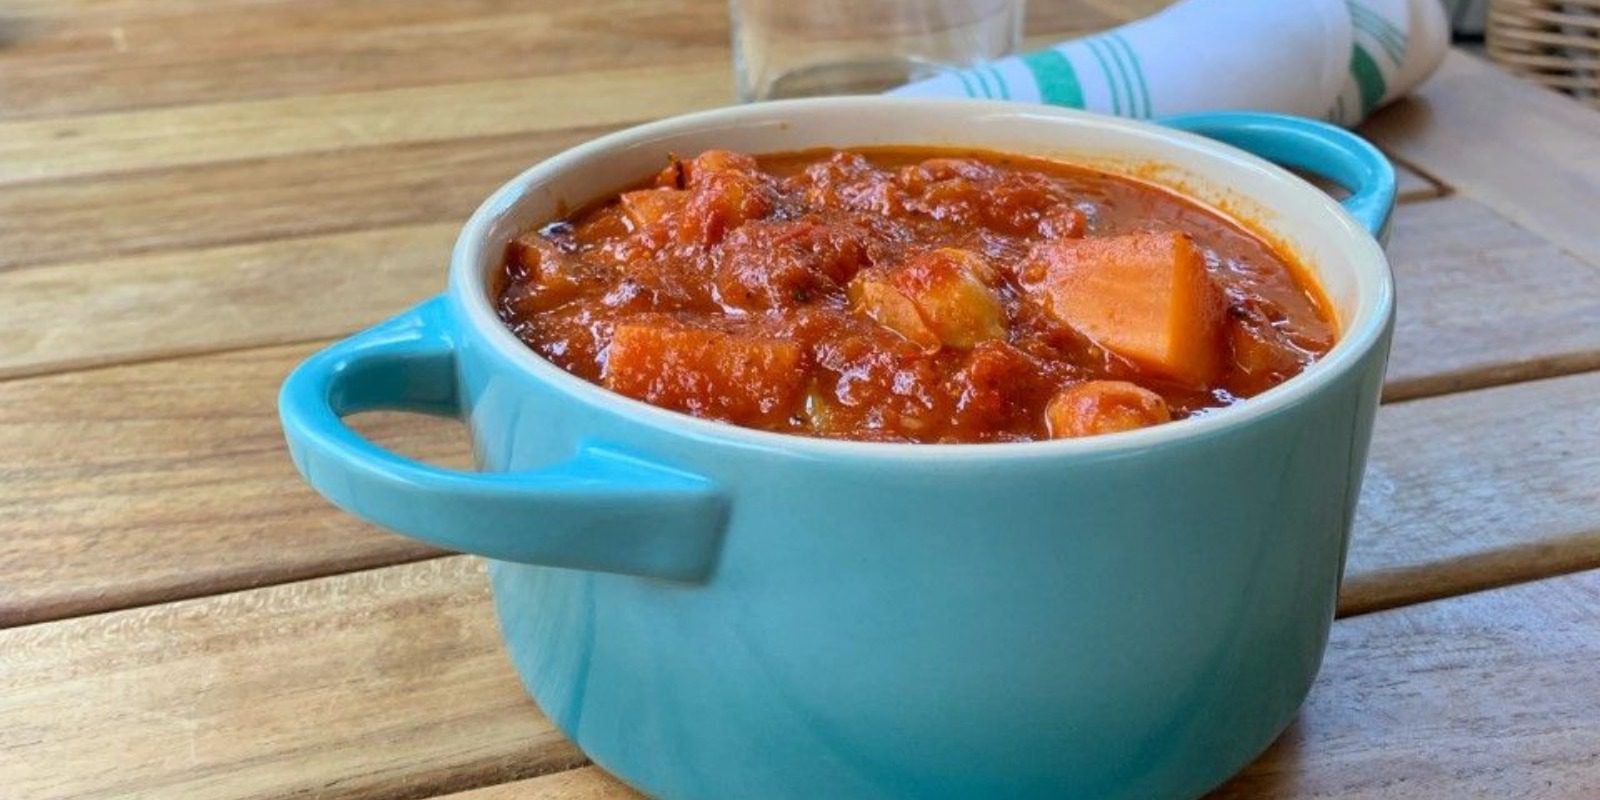 Chickpea stew with harissa and sweet potatoes